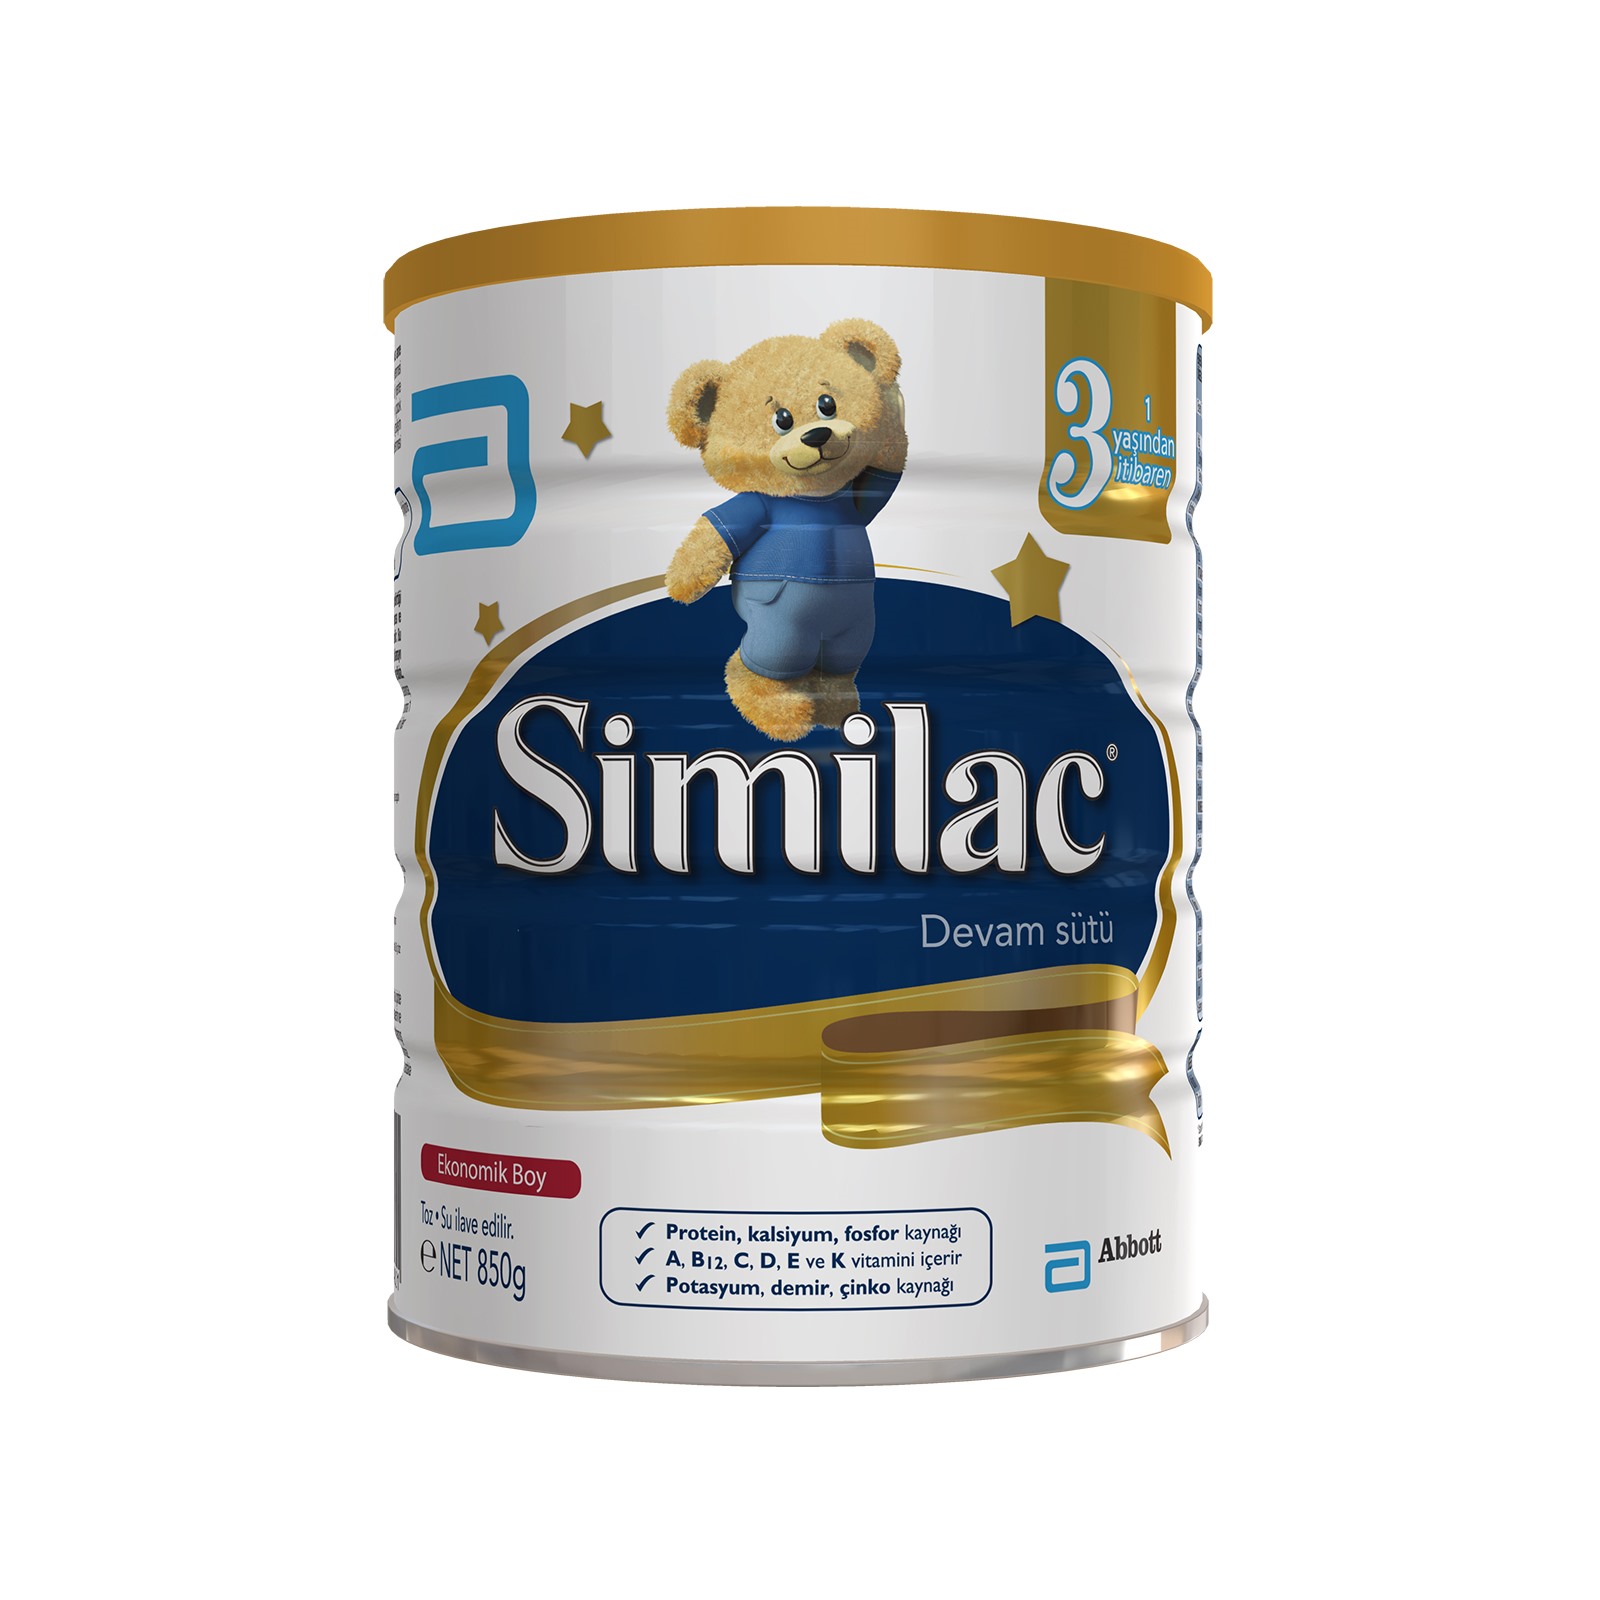 best milk for babies with sensitive stomachs